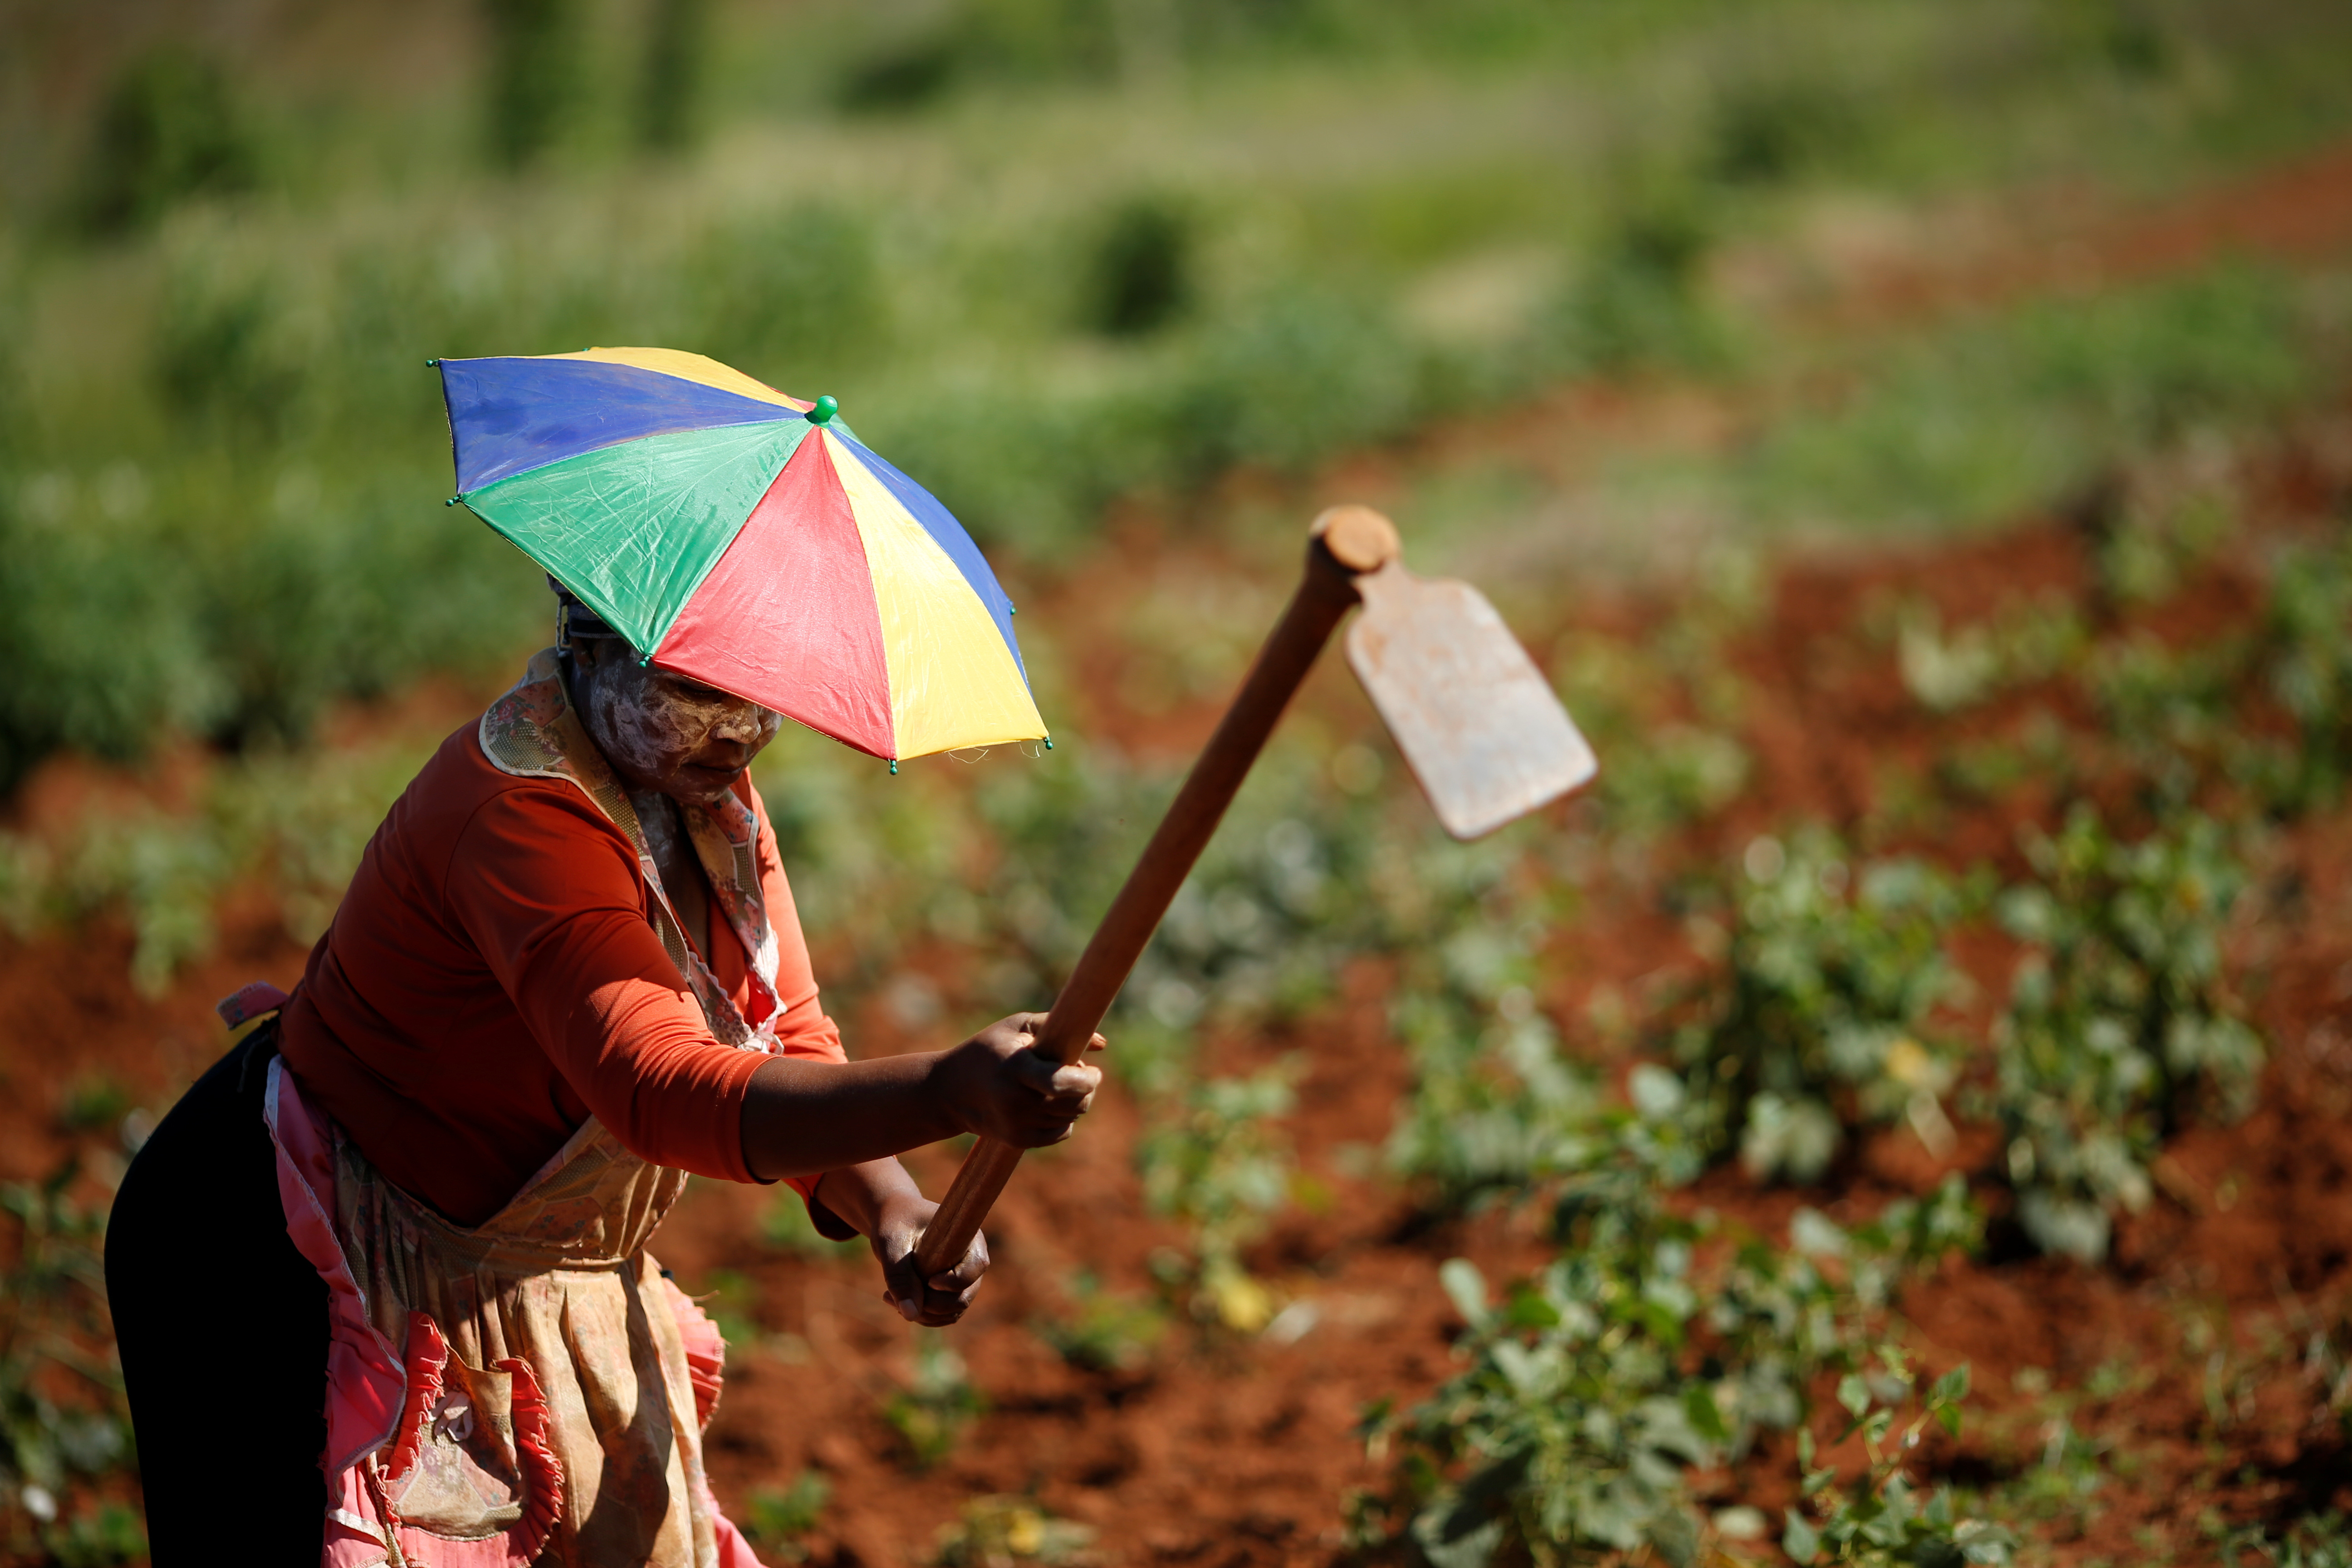 Nobutho Thethani, a local farmer works the land at Lawley informal settlement in the south of Johannesburg